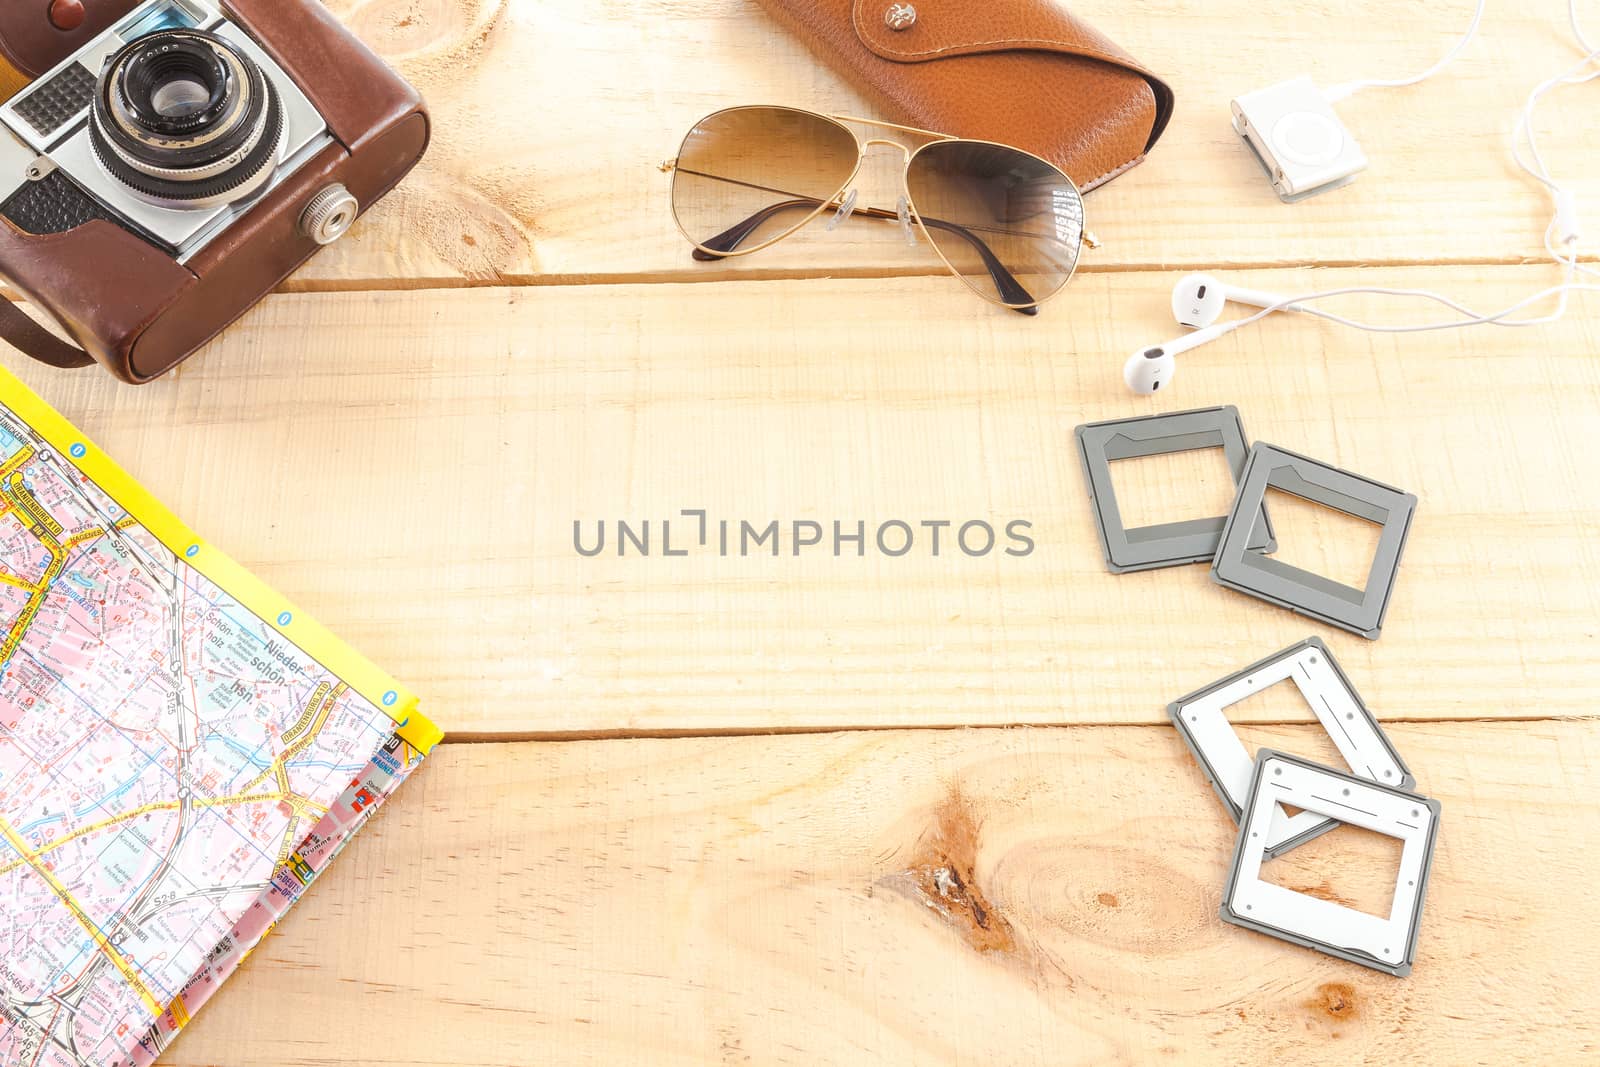 The image represents a set of objects related to photography on wooden background